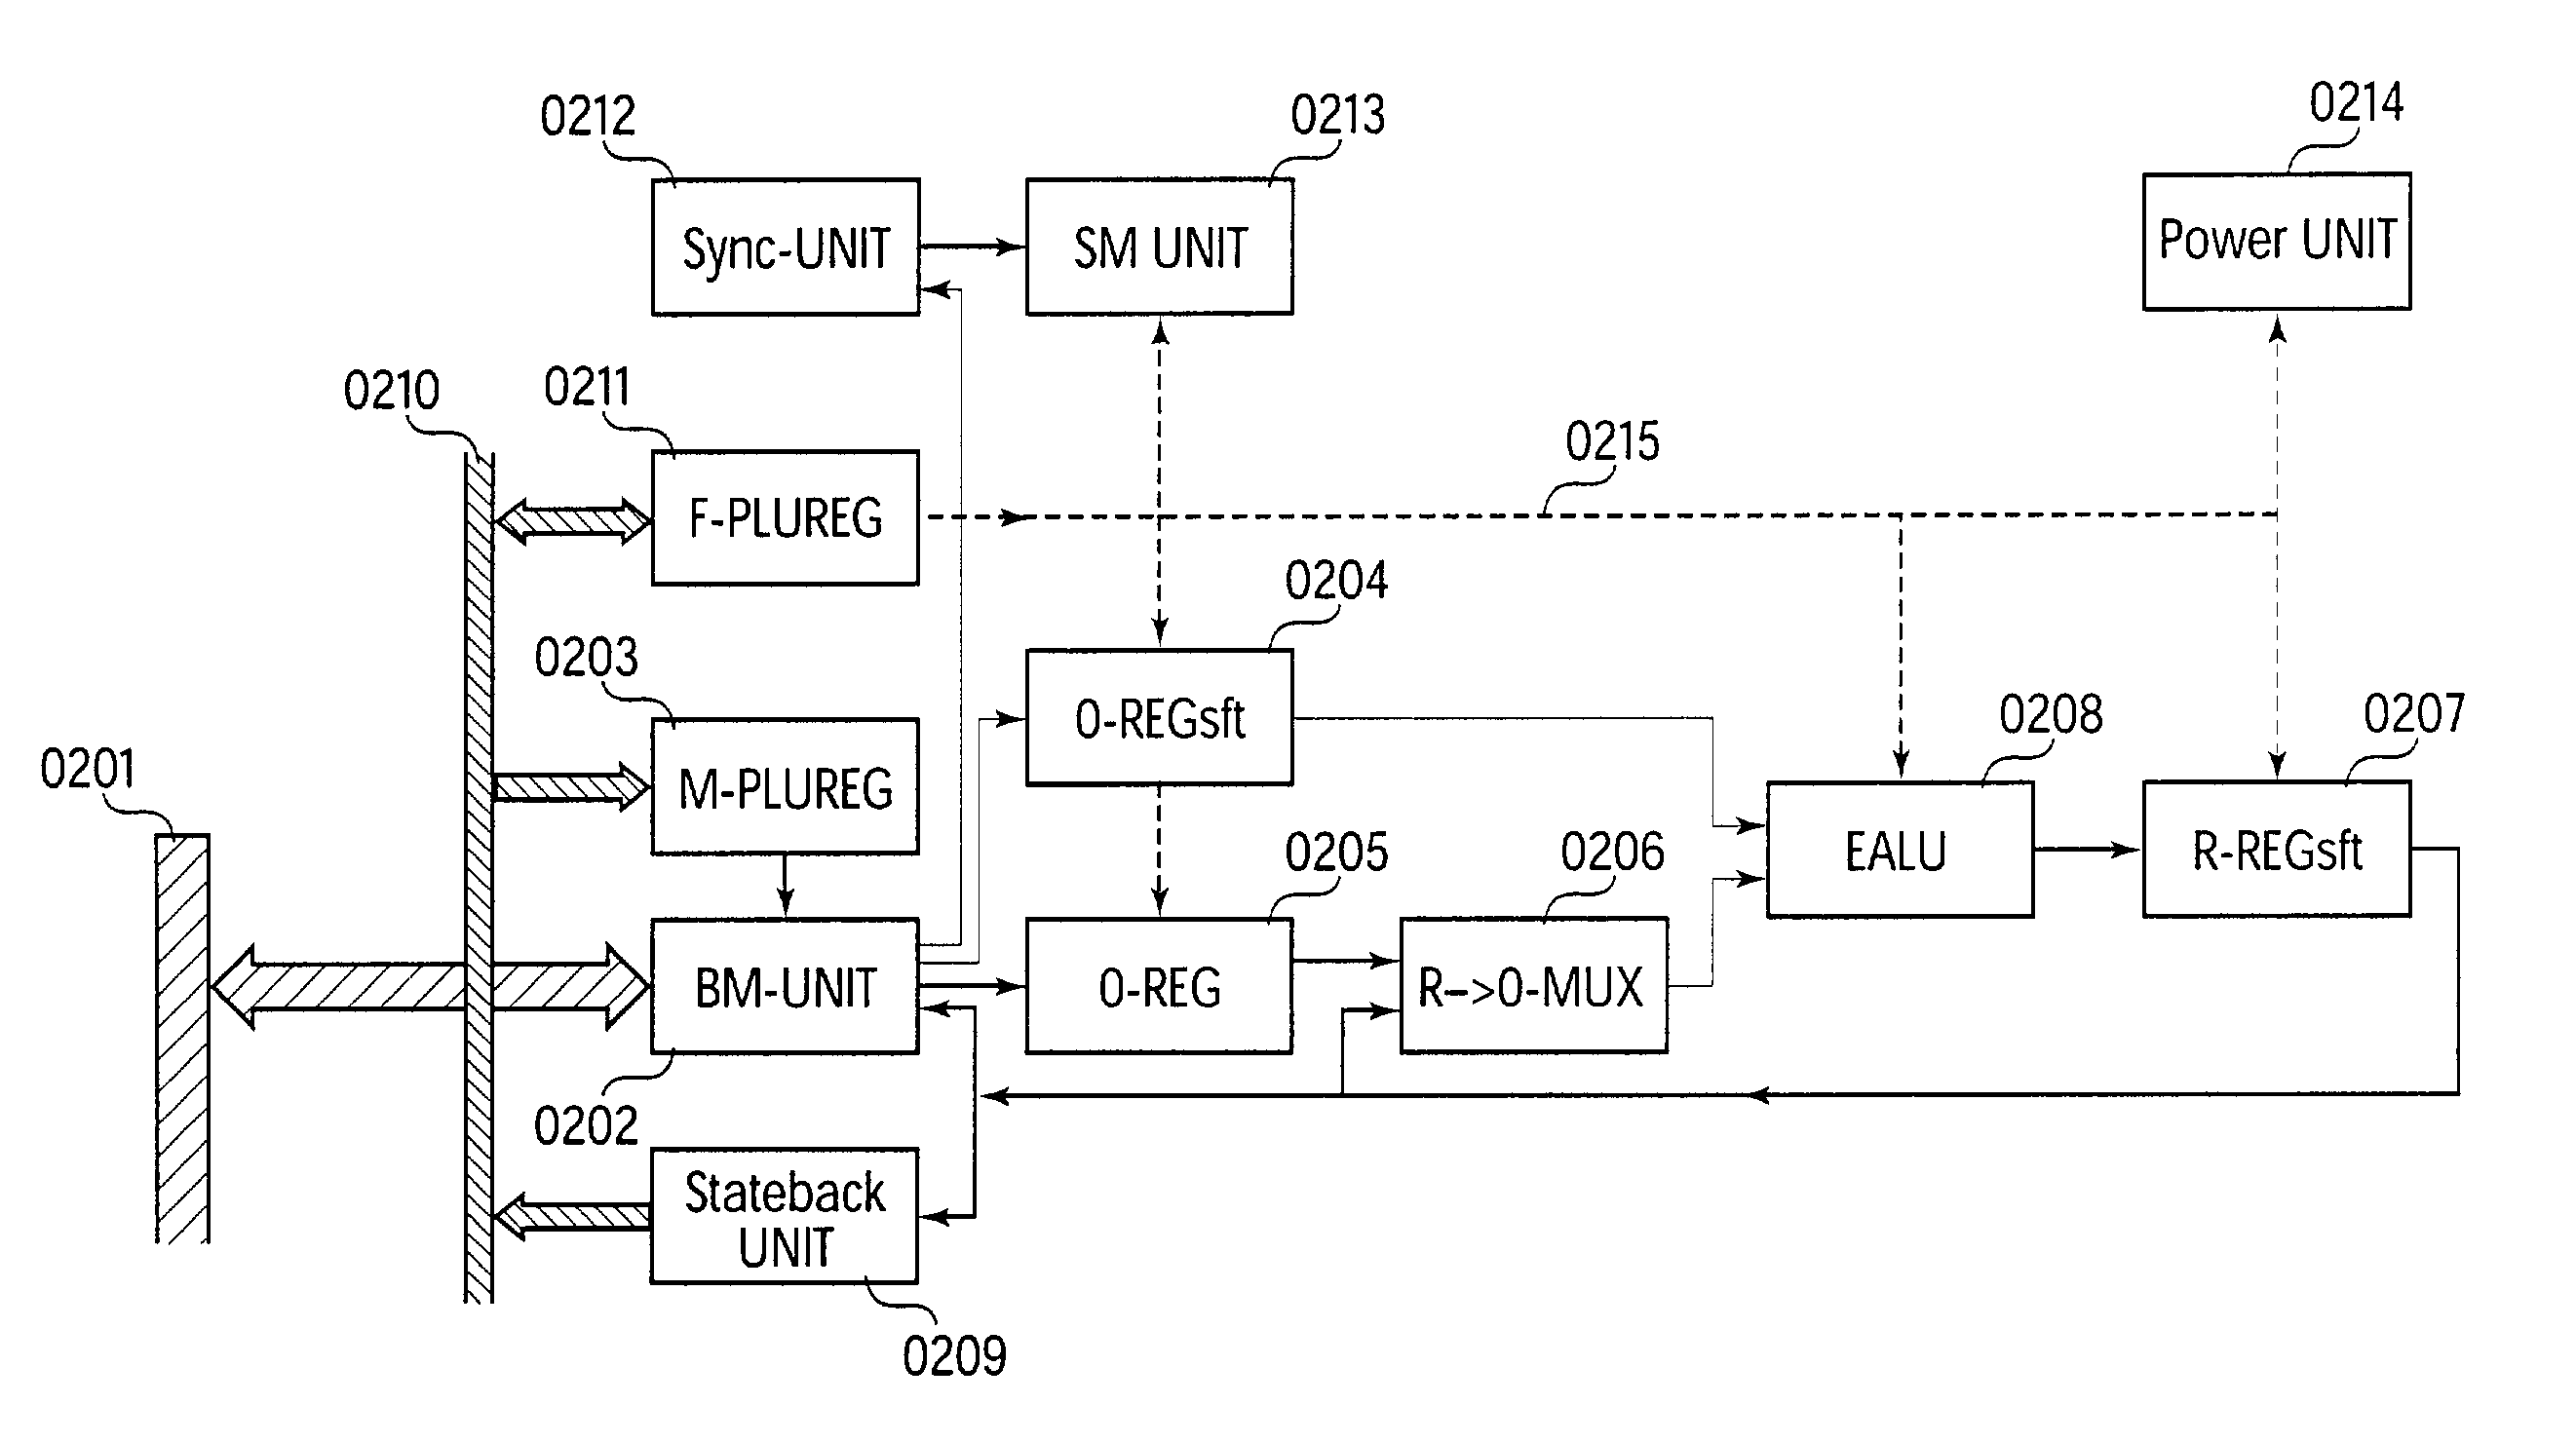 Reconfigurable multidimensional array processor allowing runtime reconfiguration of selected individual array cells